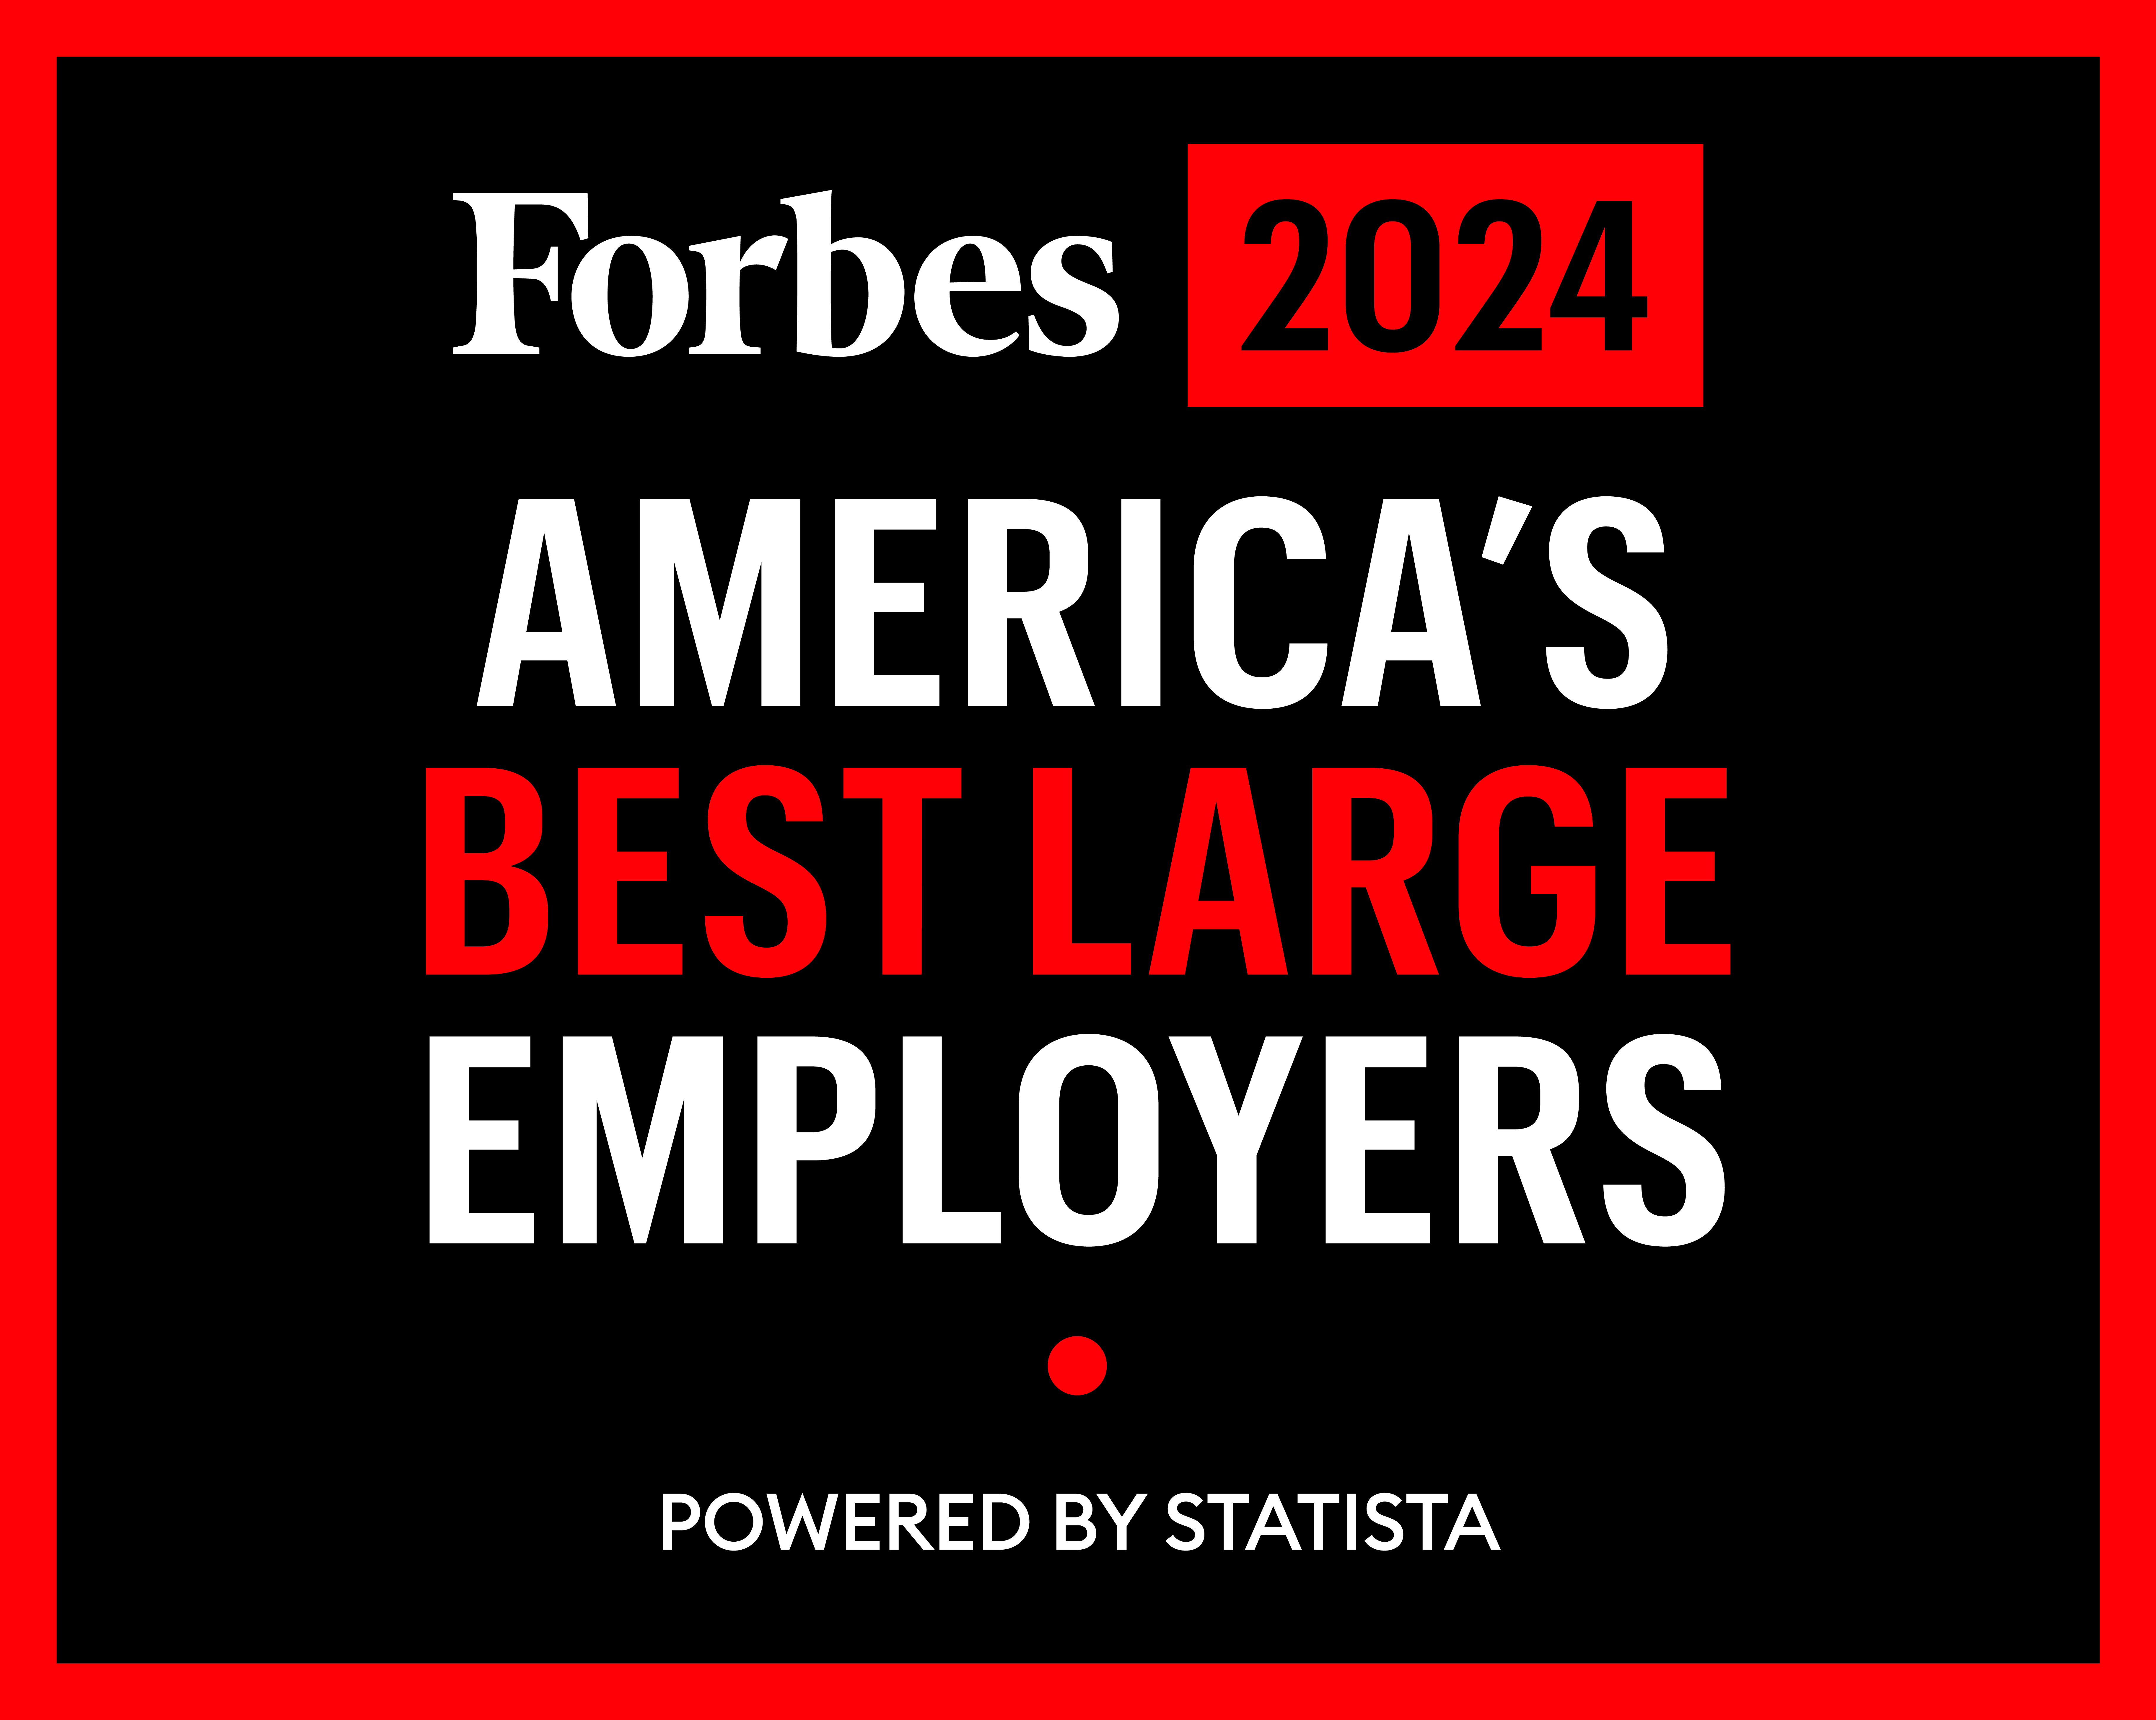 MD Anderson award - Forbes 2023 America's Best Large Employers